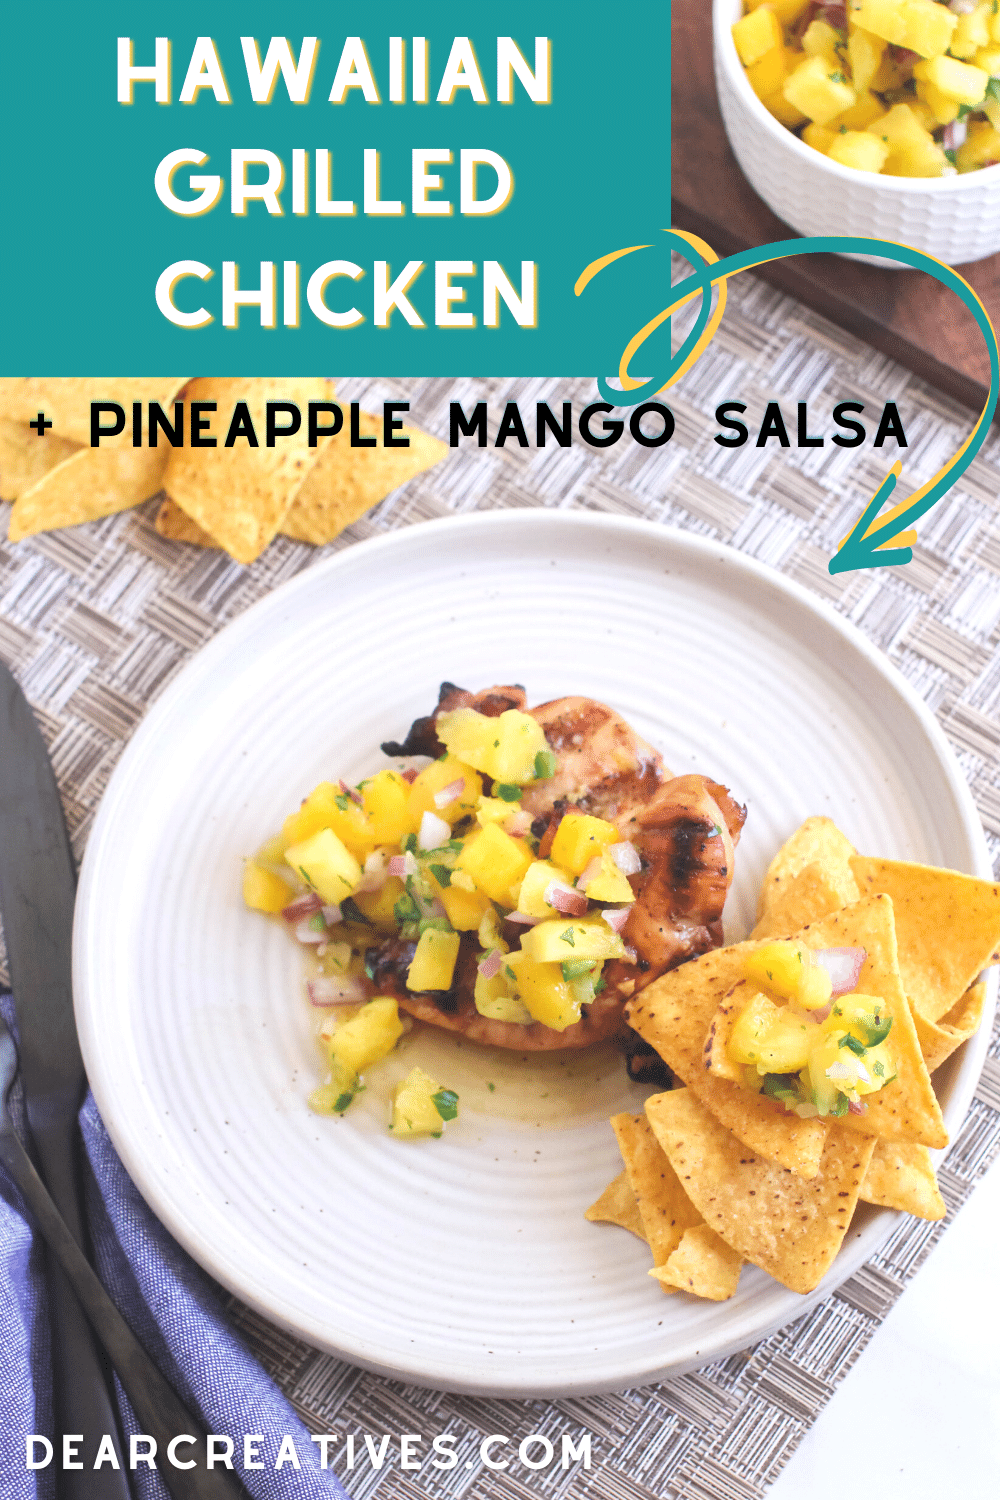 Hawaiian Grilled Chicken - This is one easy and tasty recipe that is so flavorful! First, make the Hawaiian Marinade For Grilled Chicken and grill it. & make Pineapple Mango Salsa to serve with the grilled chicken. See the easy steps and recipes and have grilled chicken tonight! DearCreatives.com